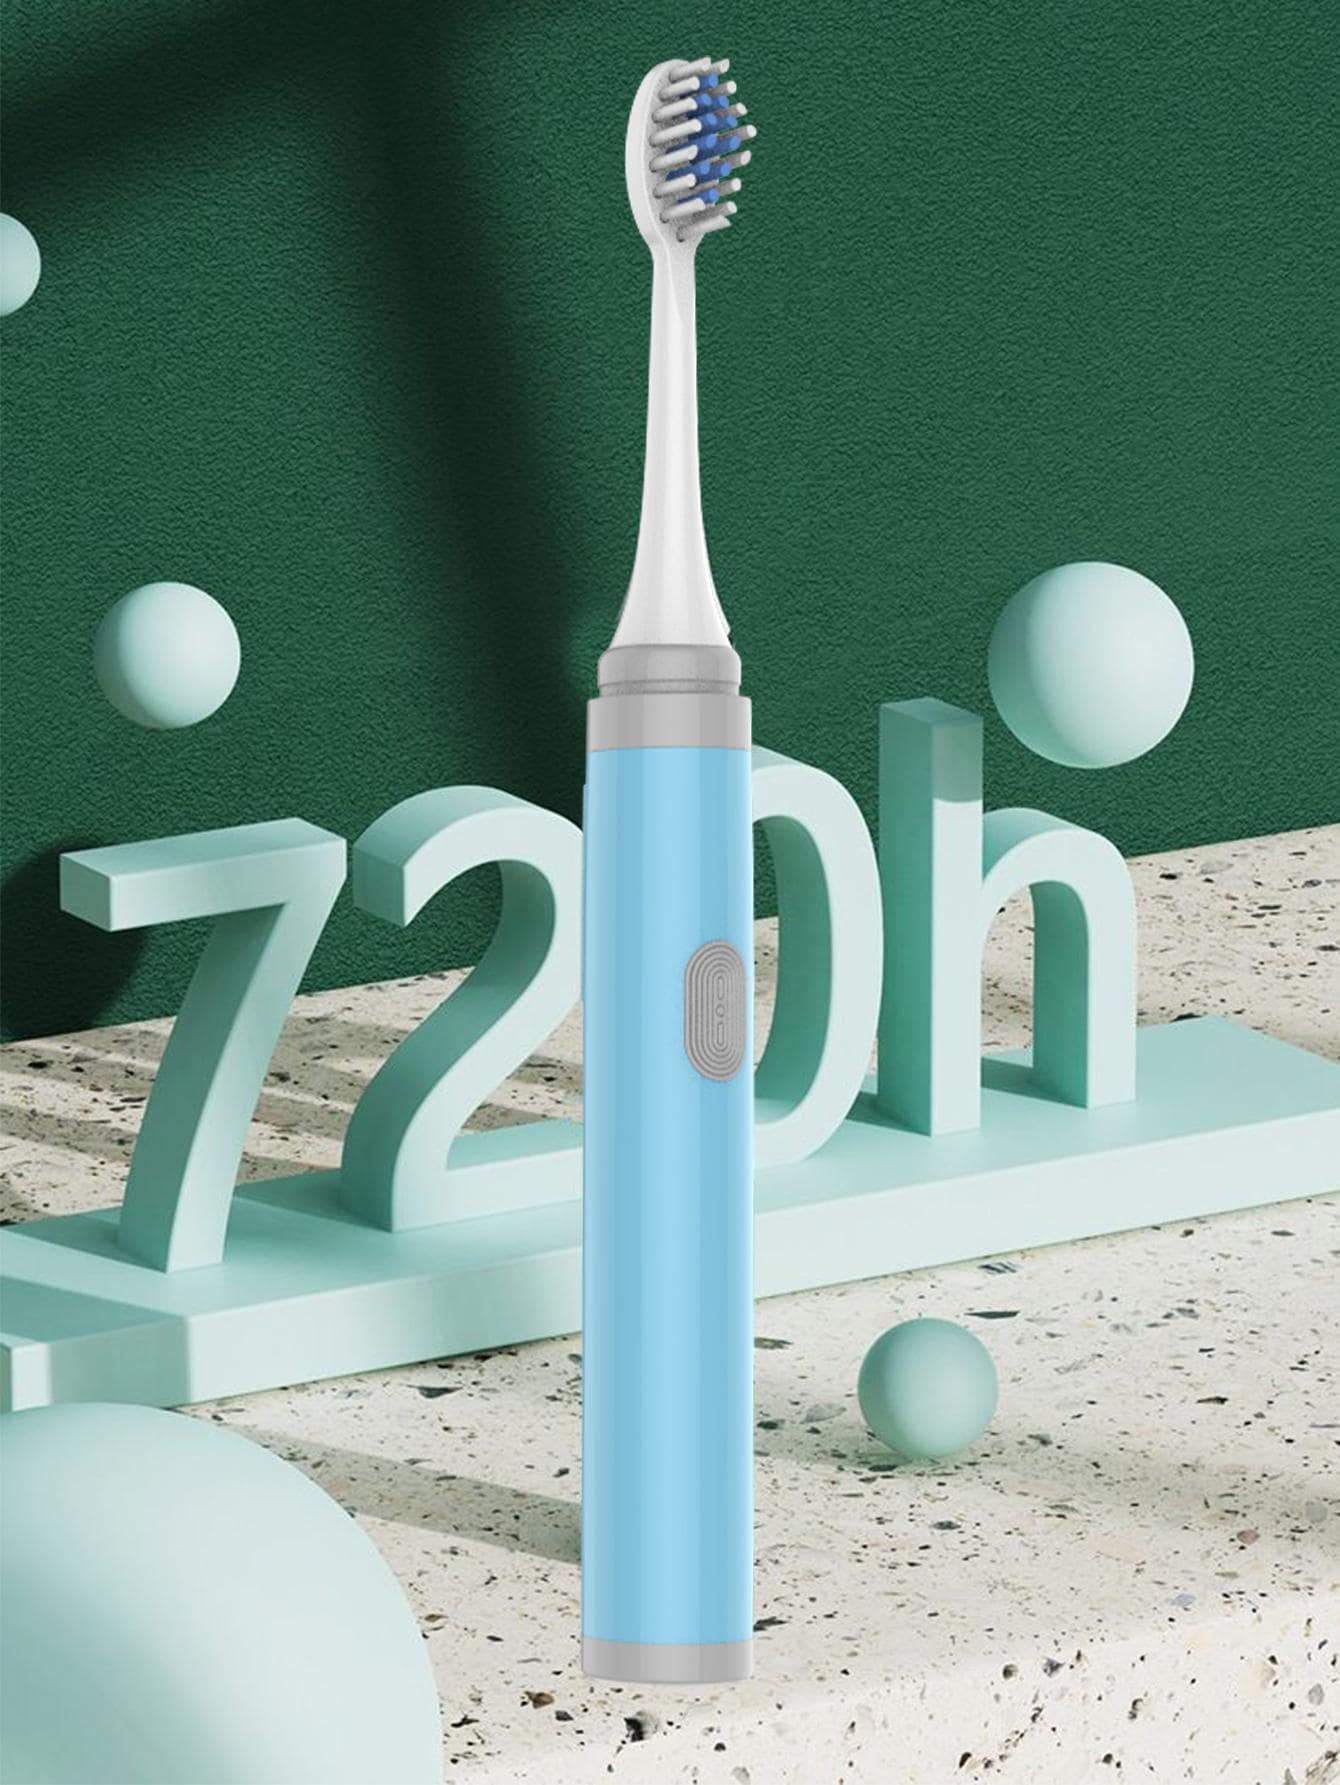 1pc PP Electric Toothbrush & 5pcs Replacement Toothbrush Head, Modern Two Tone Waterproof Portable Electric Toothbrush For Bathroom